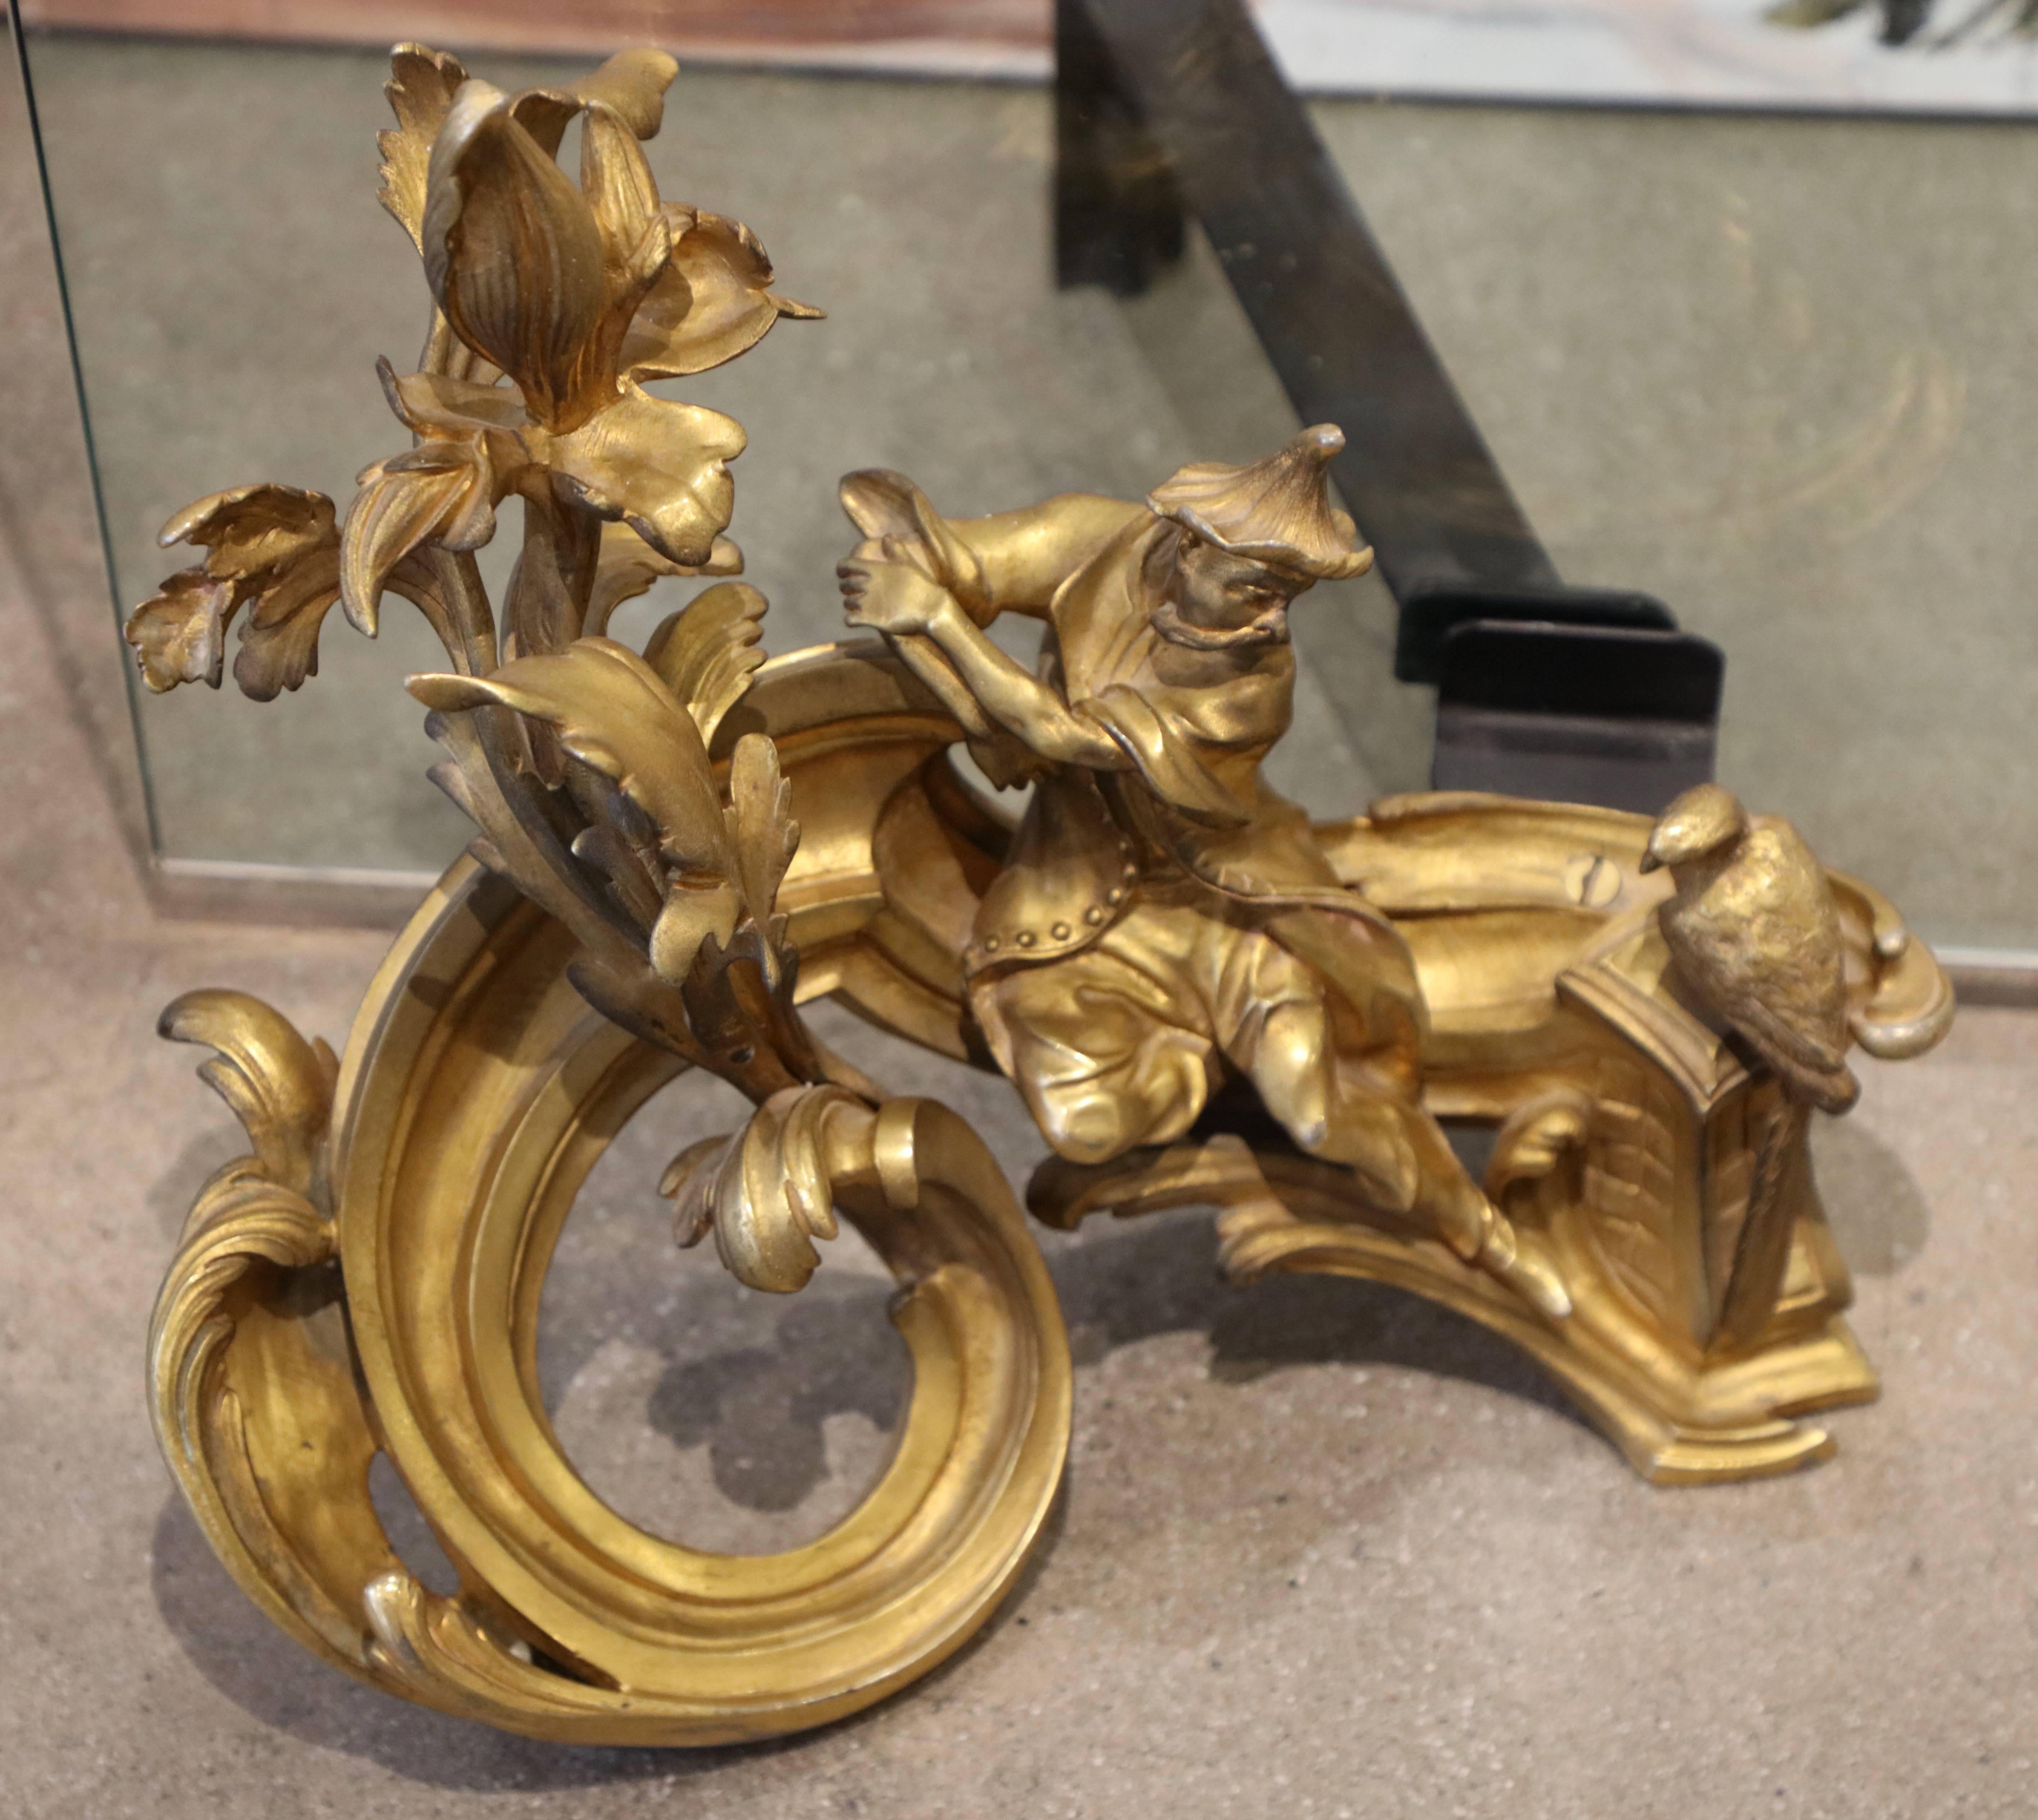 A wonderful re-purposing of 19th century ormolu gilt bronze chenets. Someone added supports for a glass fire screen. These chants are of exceptional quality and are stamped E*M. Not sure of the foundry, but these are of extremely high quality. The